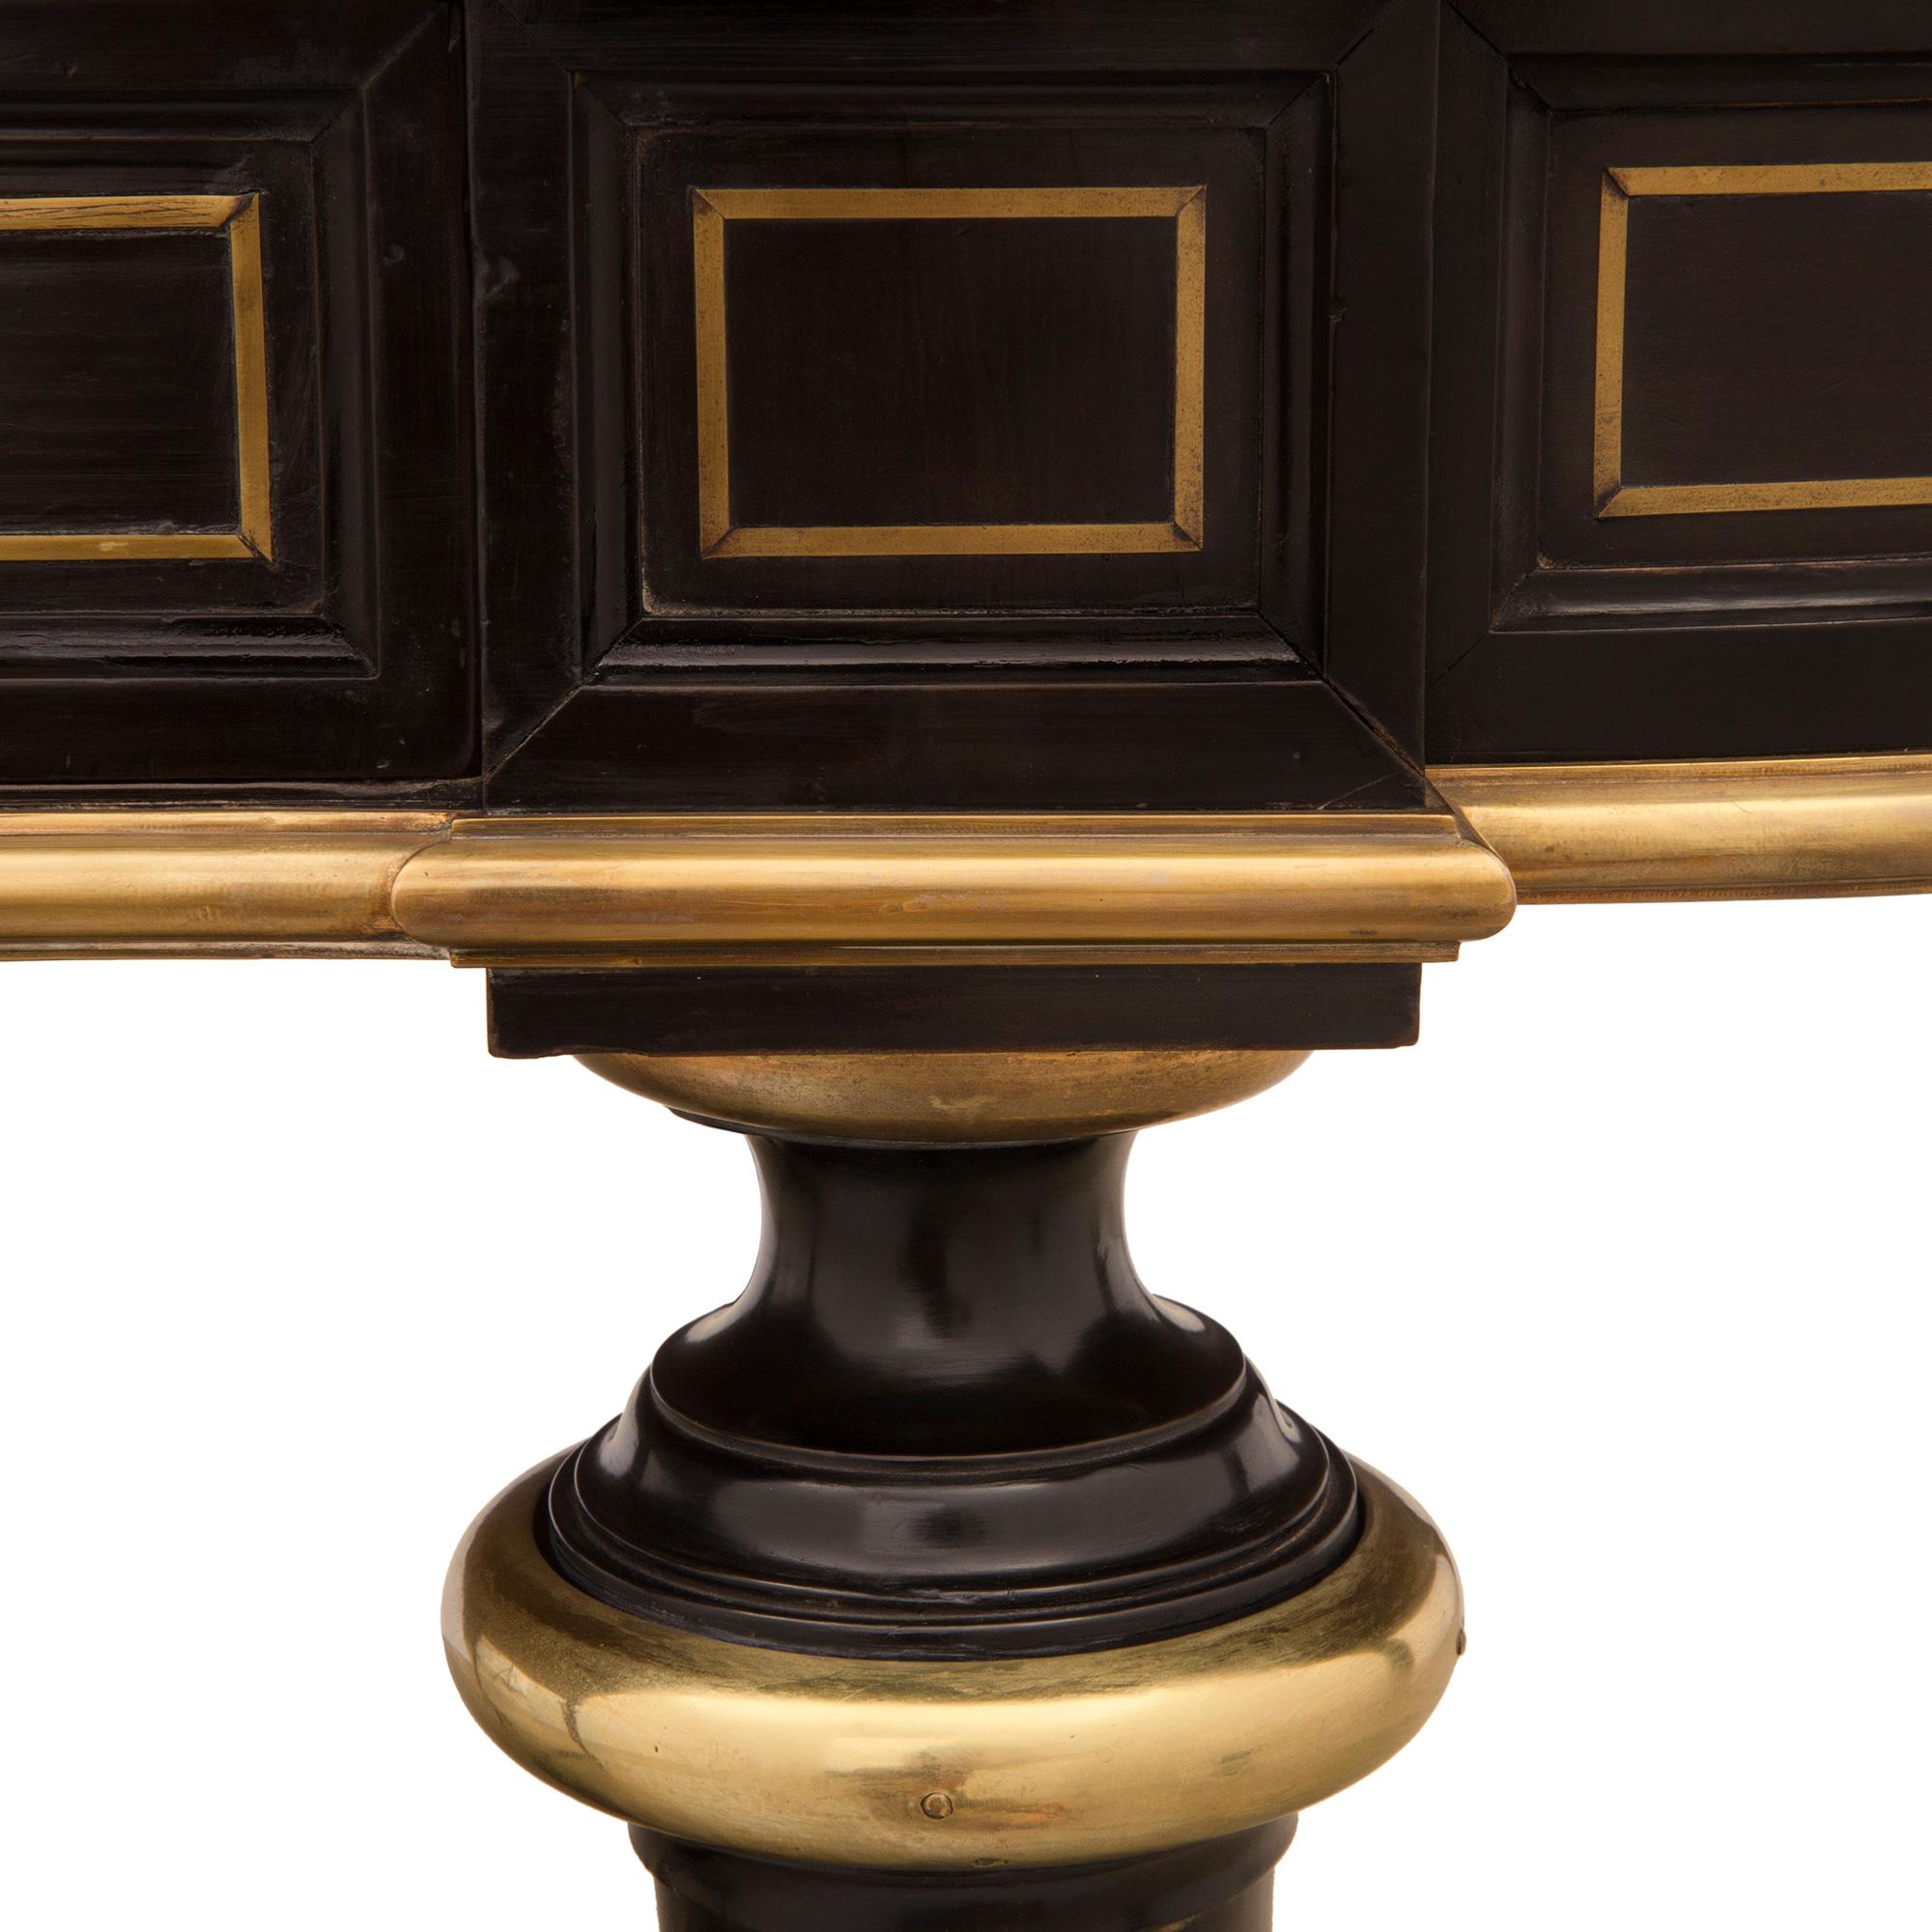 French 19th Century Napoleon III Period Ebony and Brass Inlaid Desk For Sale 2